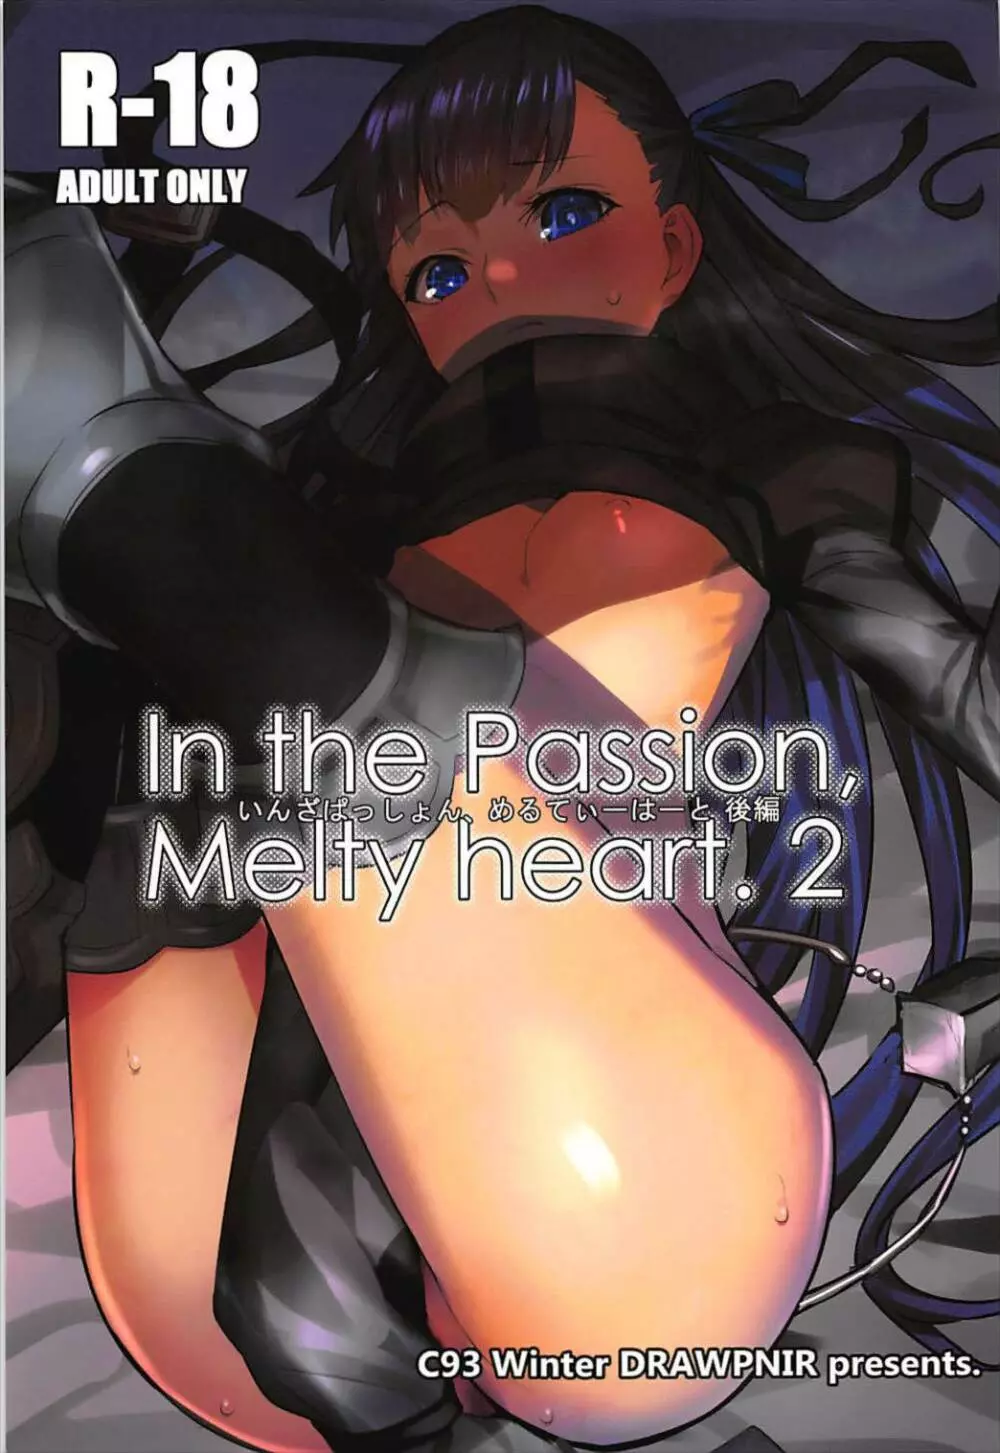 In the Passion Melty heart.2